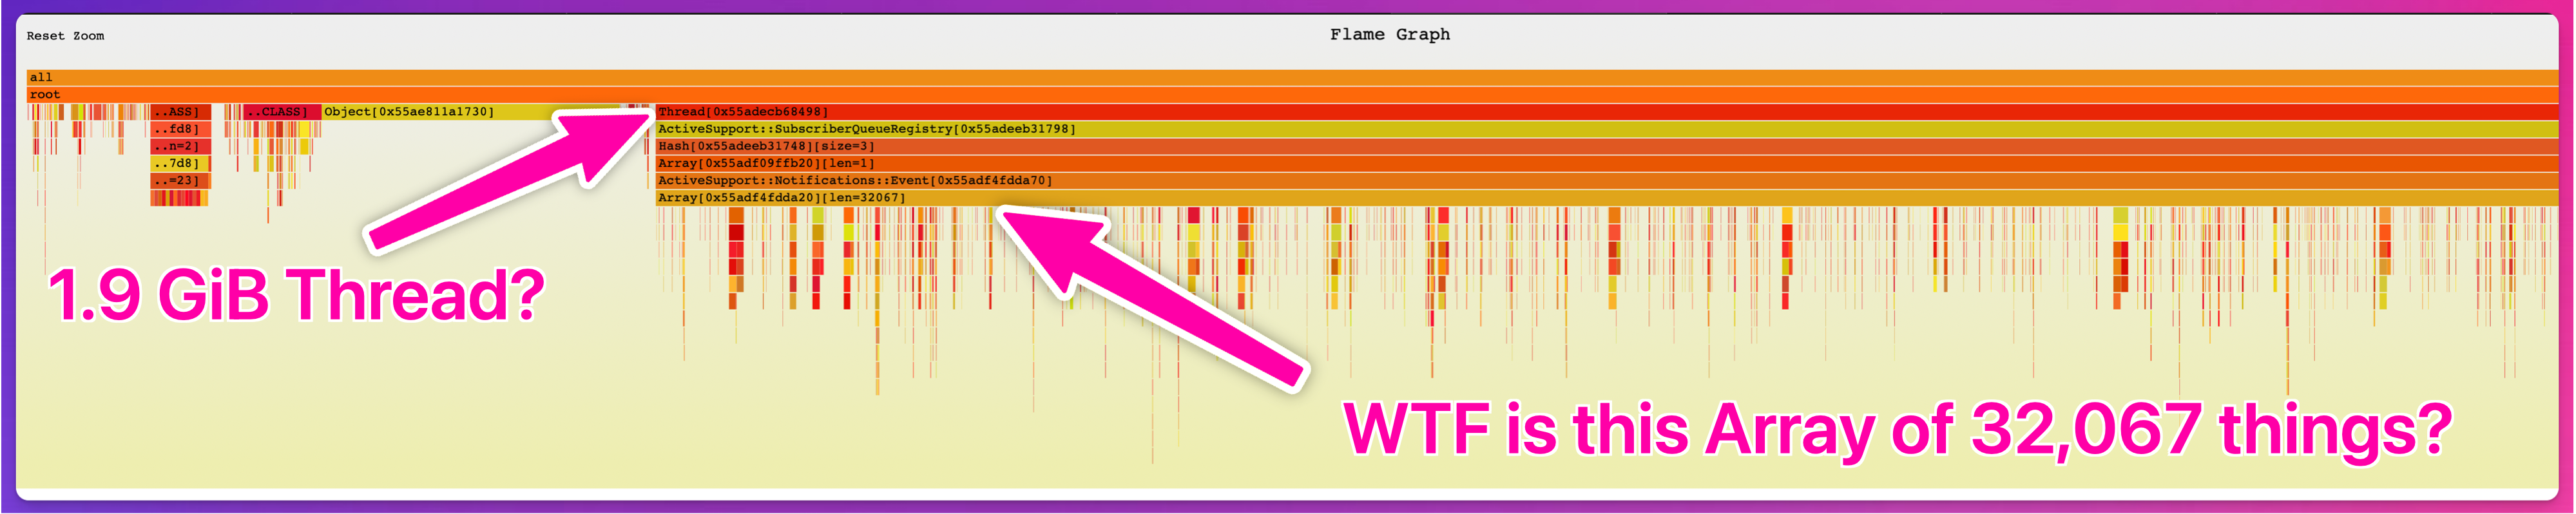 Flame graph calling out an Array of 32k things, referencing 1.9GiB of memory.